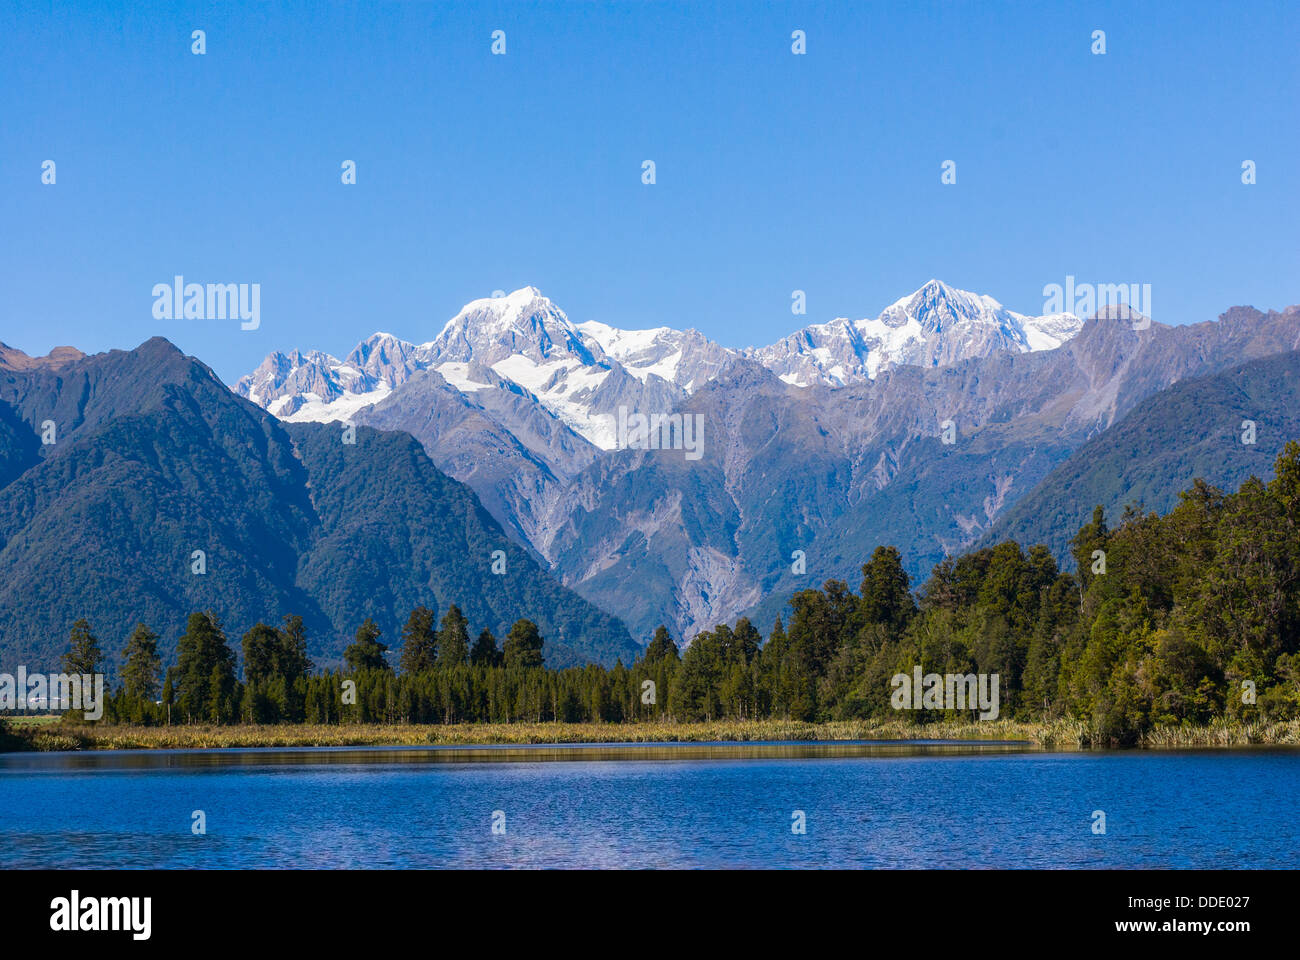 Aoraki Mount Cook (3754m) is the highest mountain in New Zealand and is seen here from Lake Matheson Stock Photo